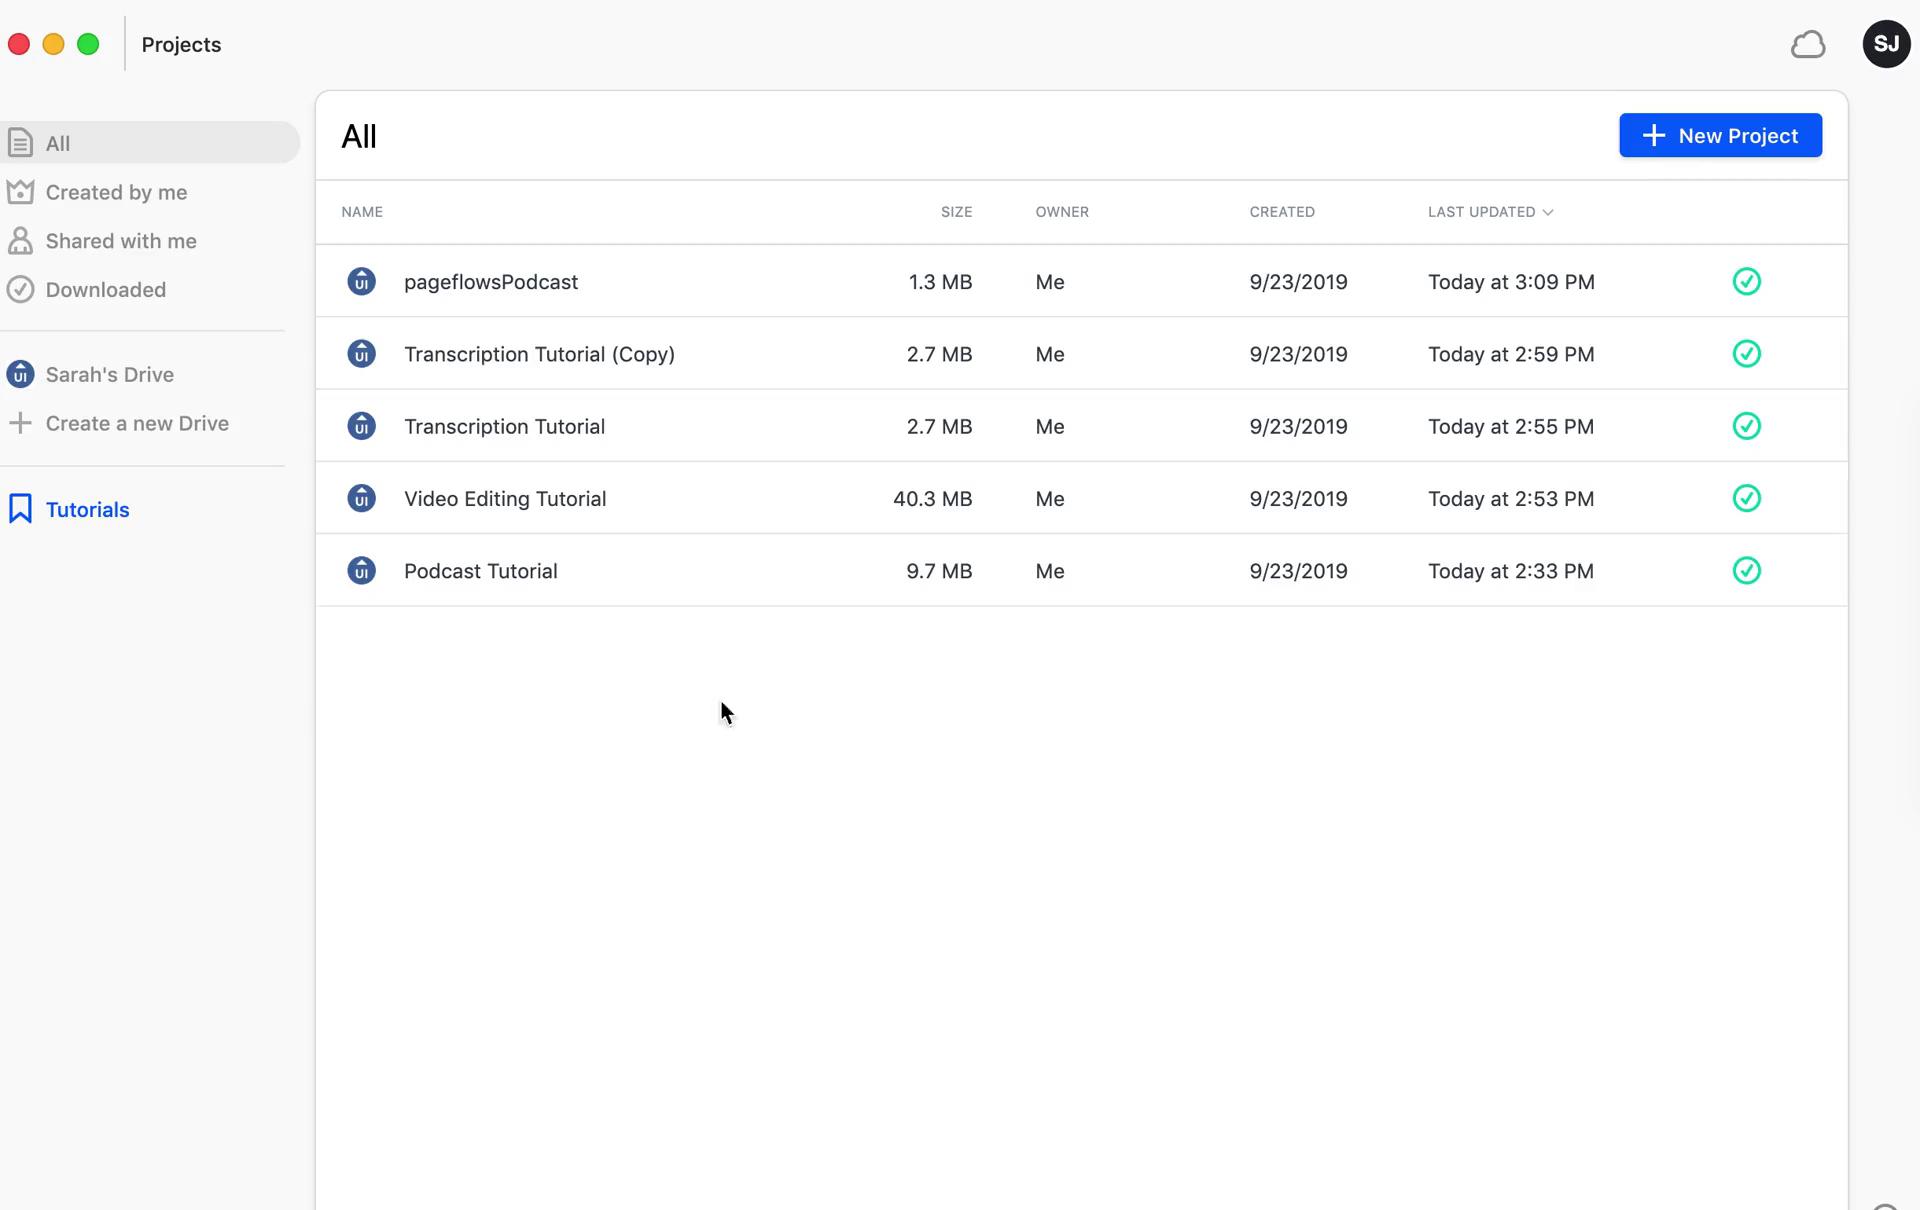 Screenshot of Projects on General browsing on Descript user flow